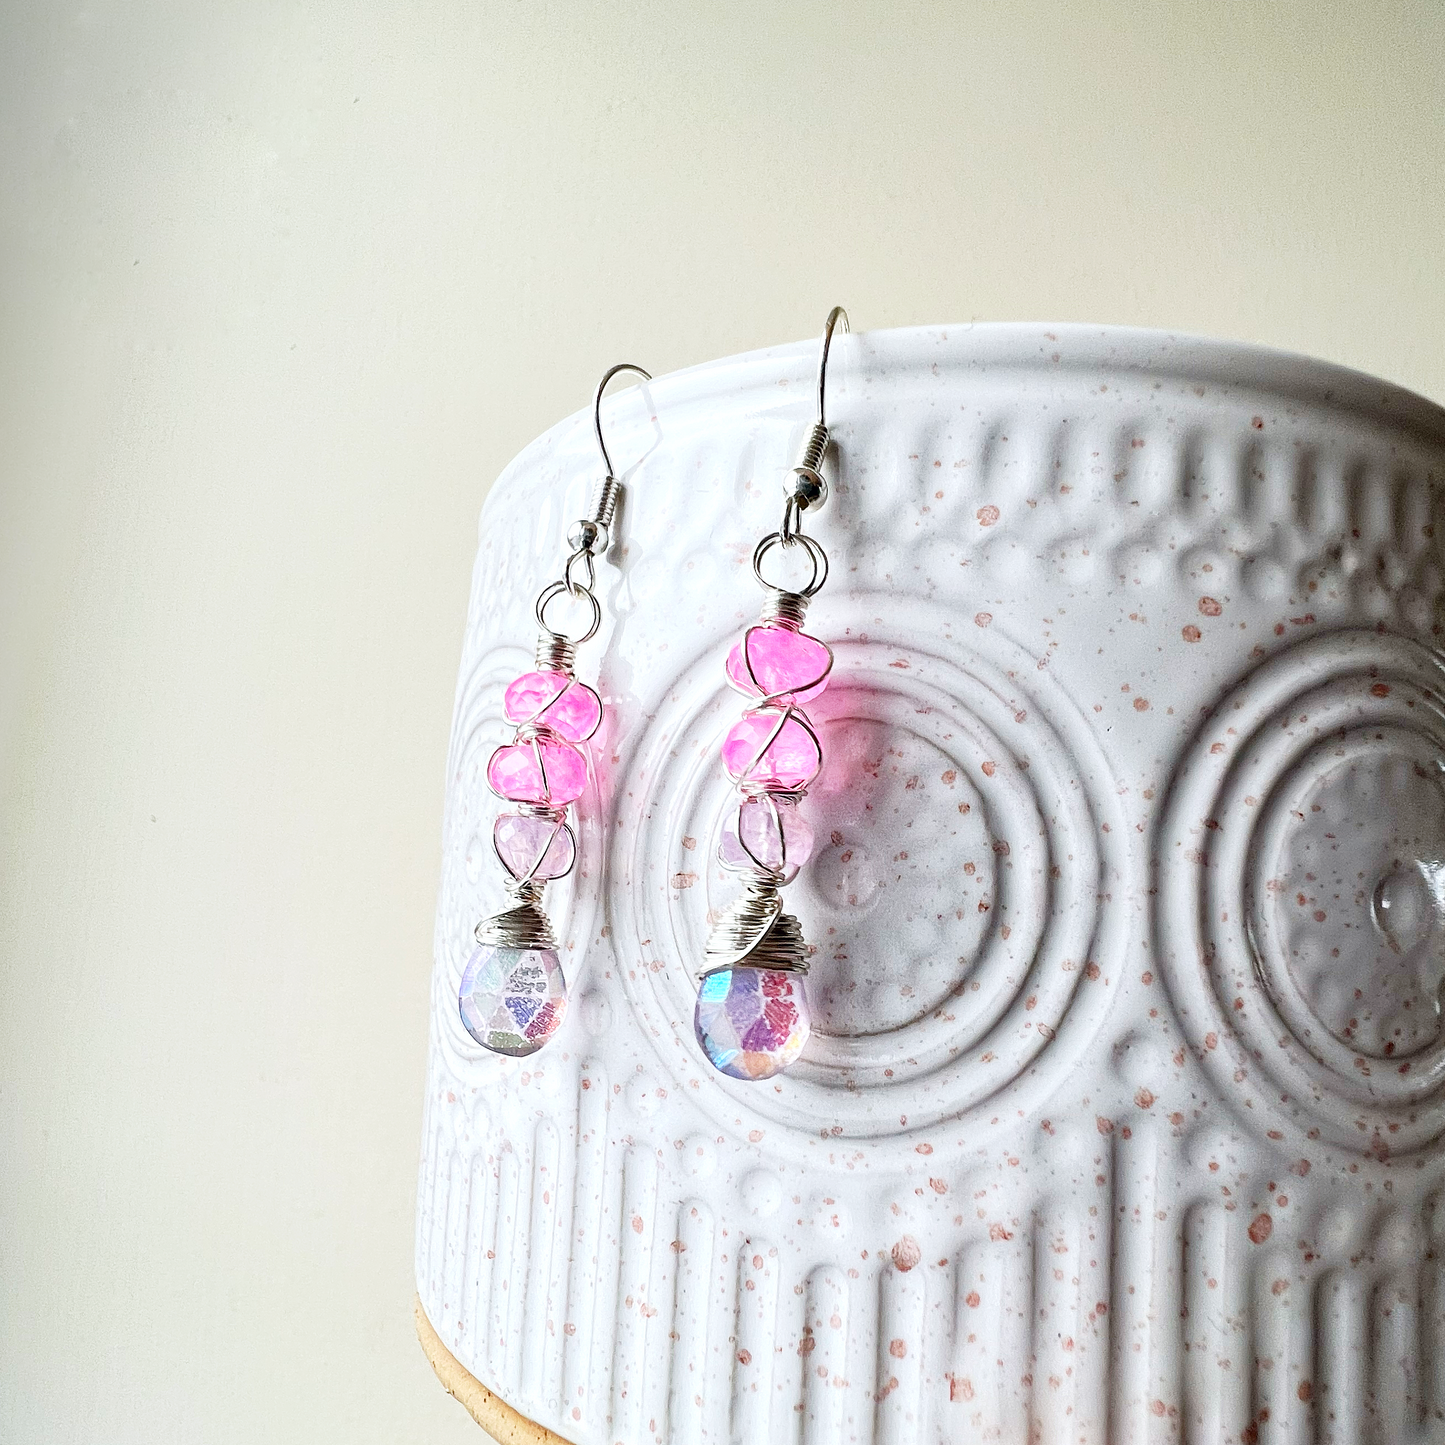 Twisted kisses earrings - Lavender amethyst and Zambian amethyst